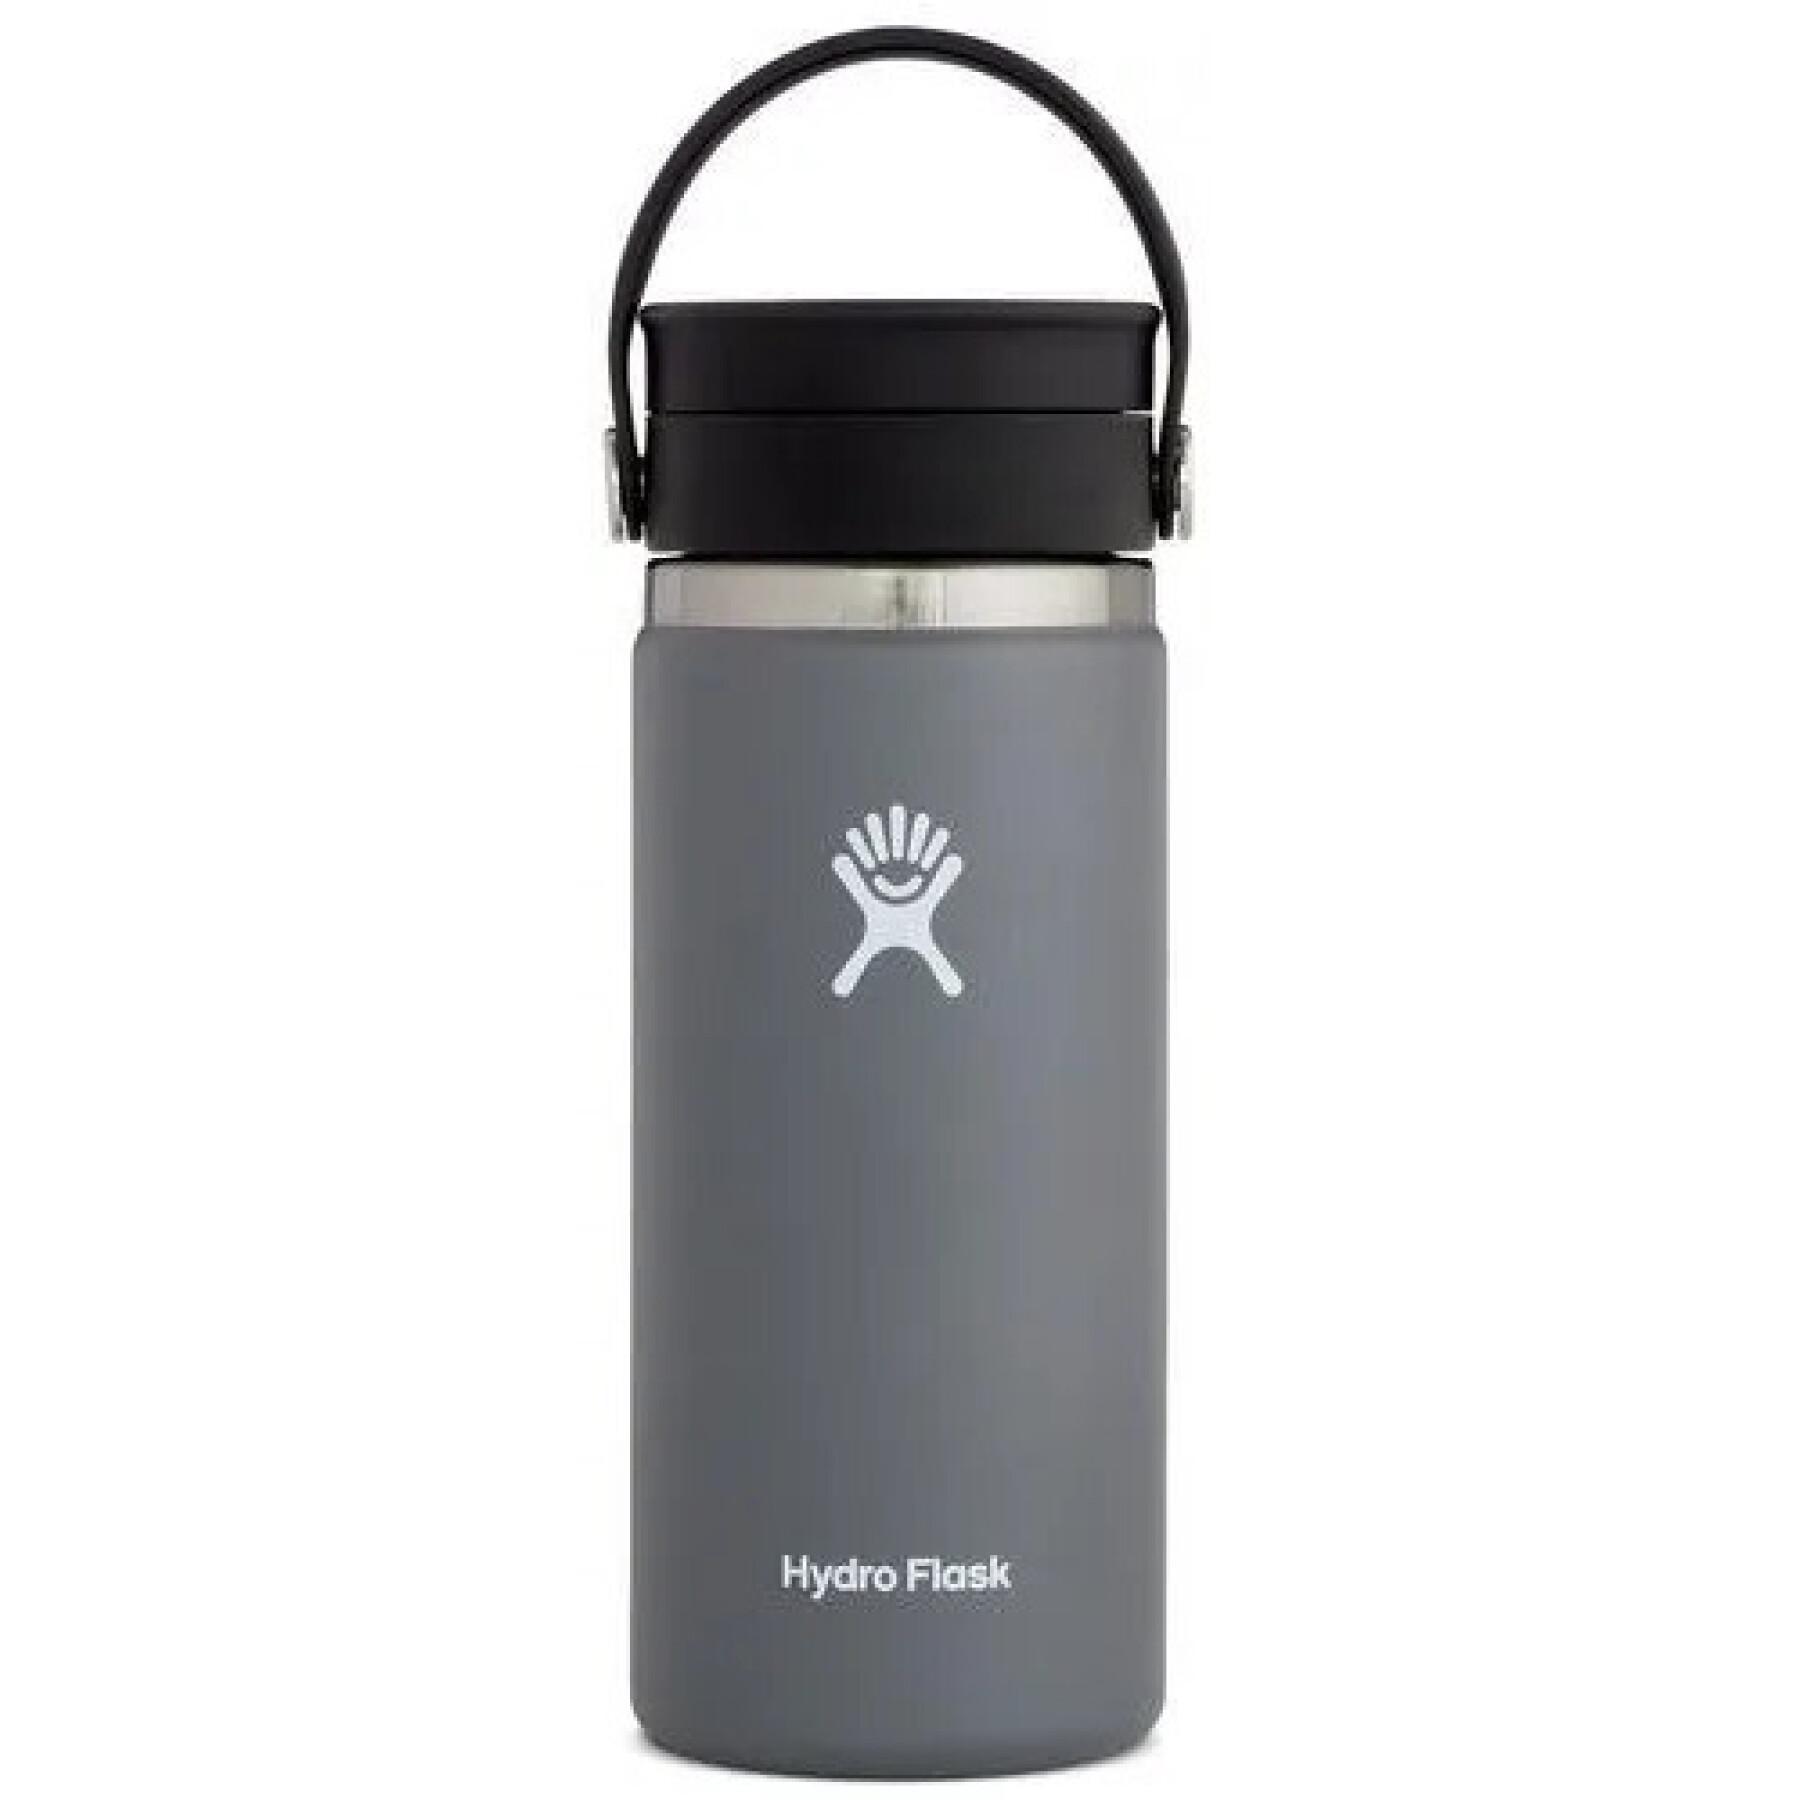 Lock Hydro Flask wide mouth with flex sip lid 16 oz